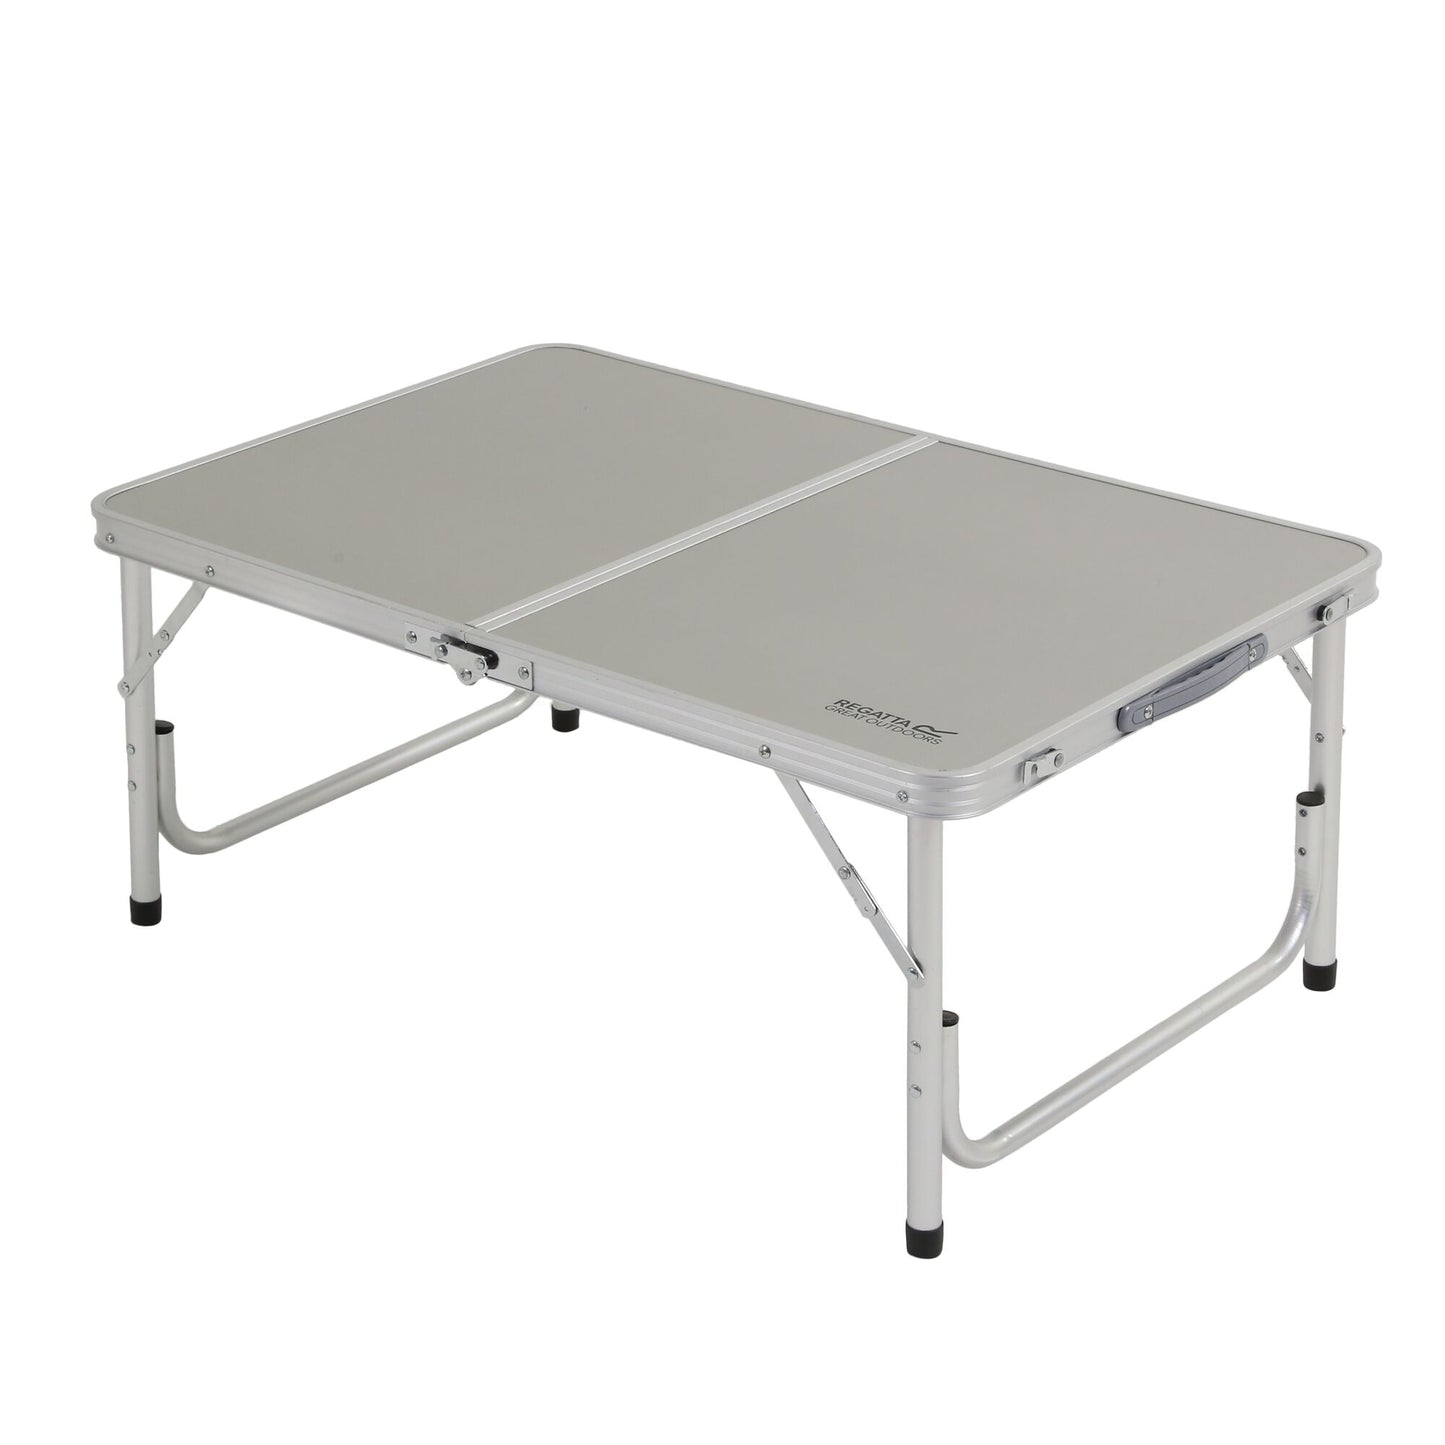 Regatta Cena Lightweight Bi-Folding Camping Table - Available in store only